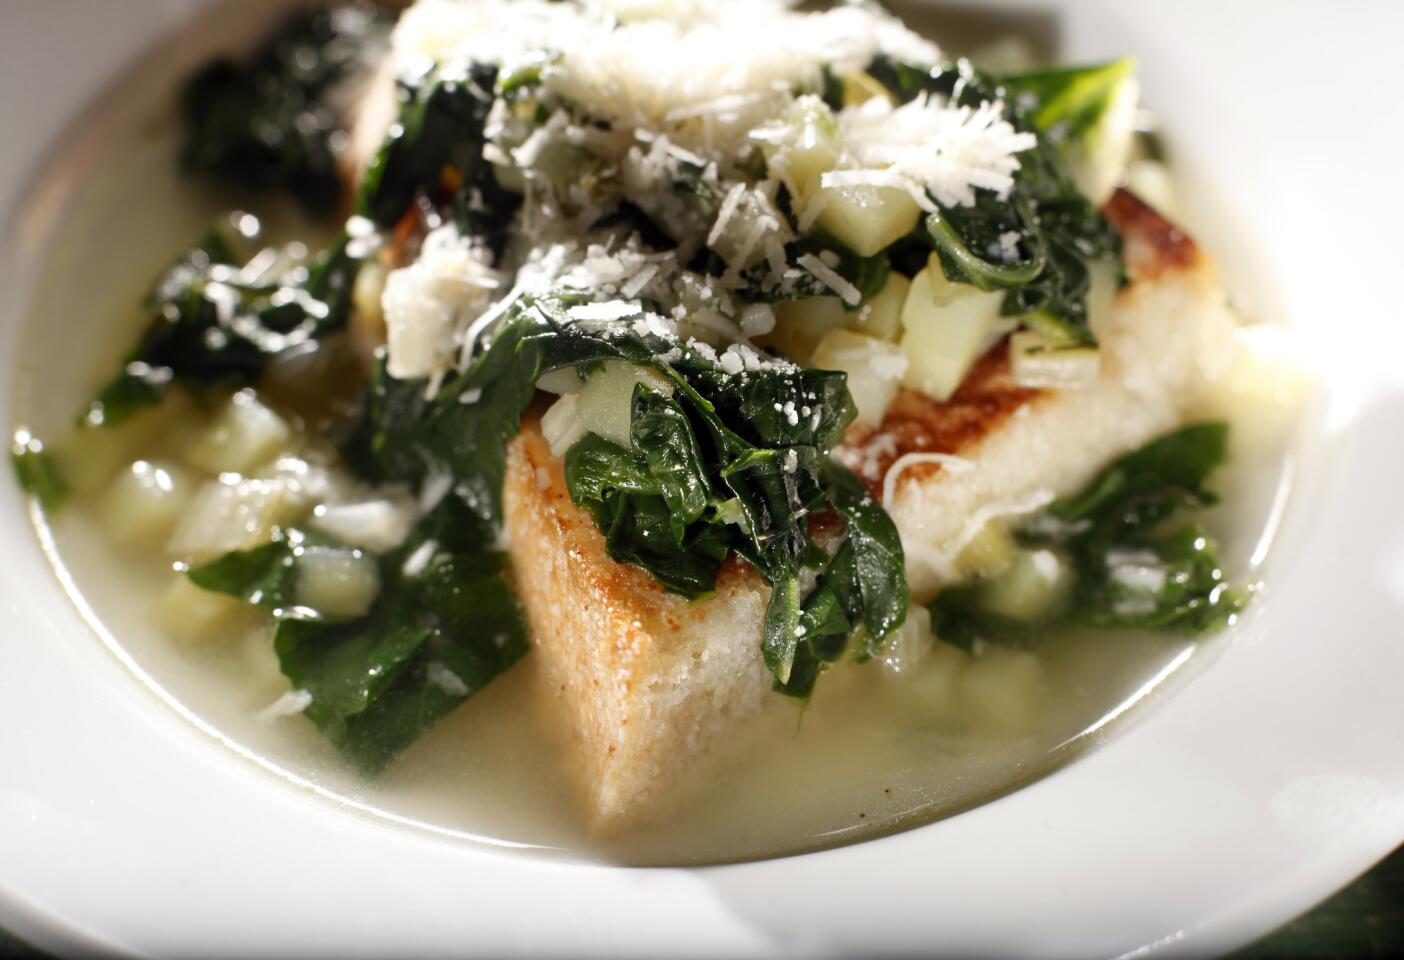 Chard soup on bread with cheese